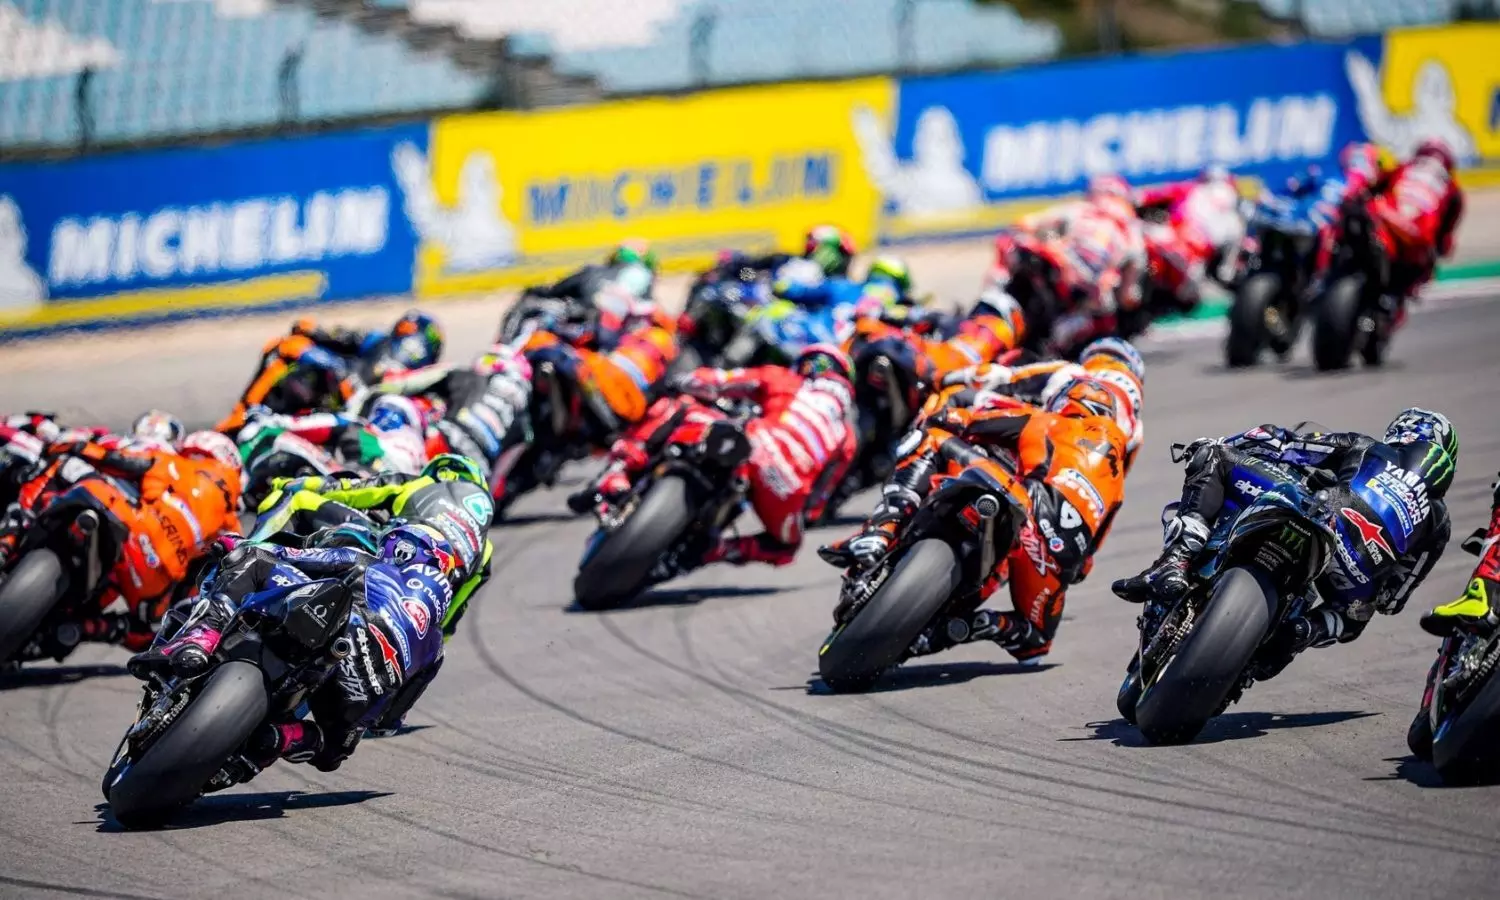 Viacom18 secures exclusive streaming rights for MotoGP in India